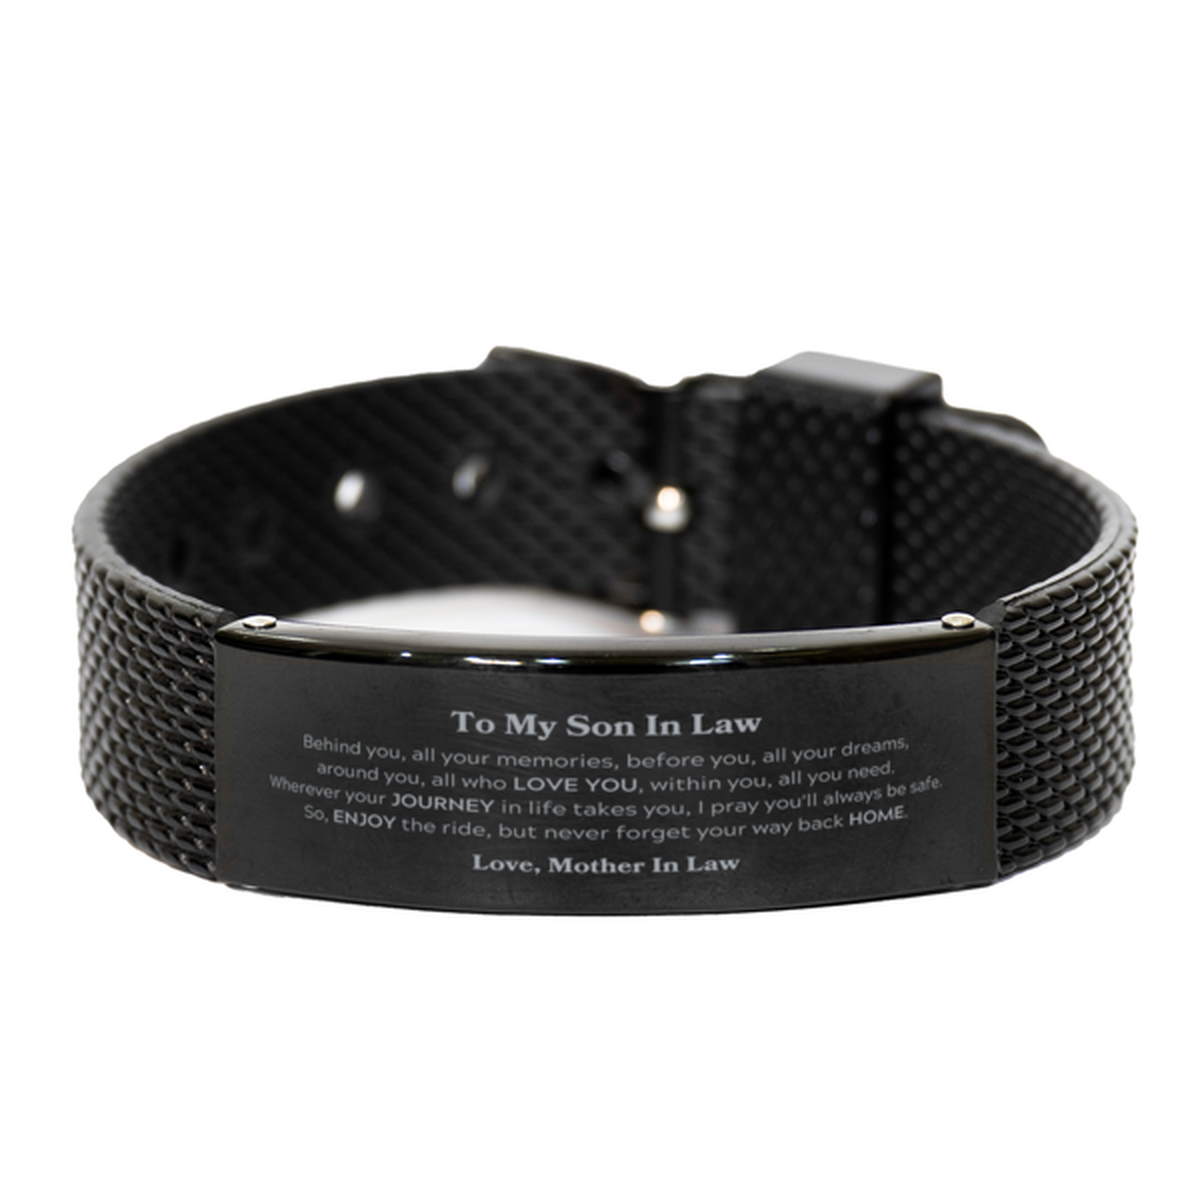 To My Son In Law Graduation Gifts from Mother In Law, Son In Law Black Shark Mesh Bracelet Christmas Birthday Gifts for Son In Law Behind you, all your memories, before you, all your dreams. Love, Mother In Law